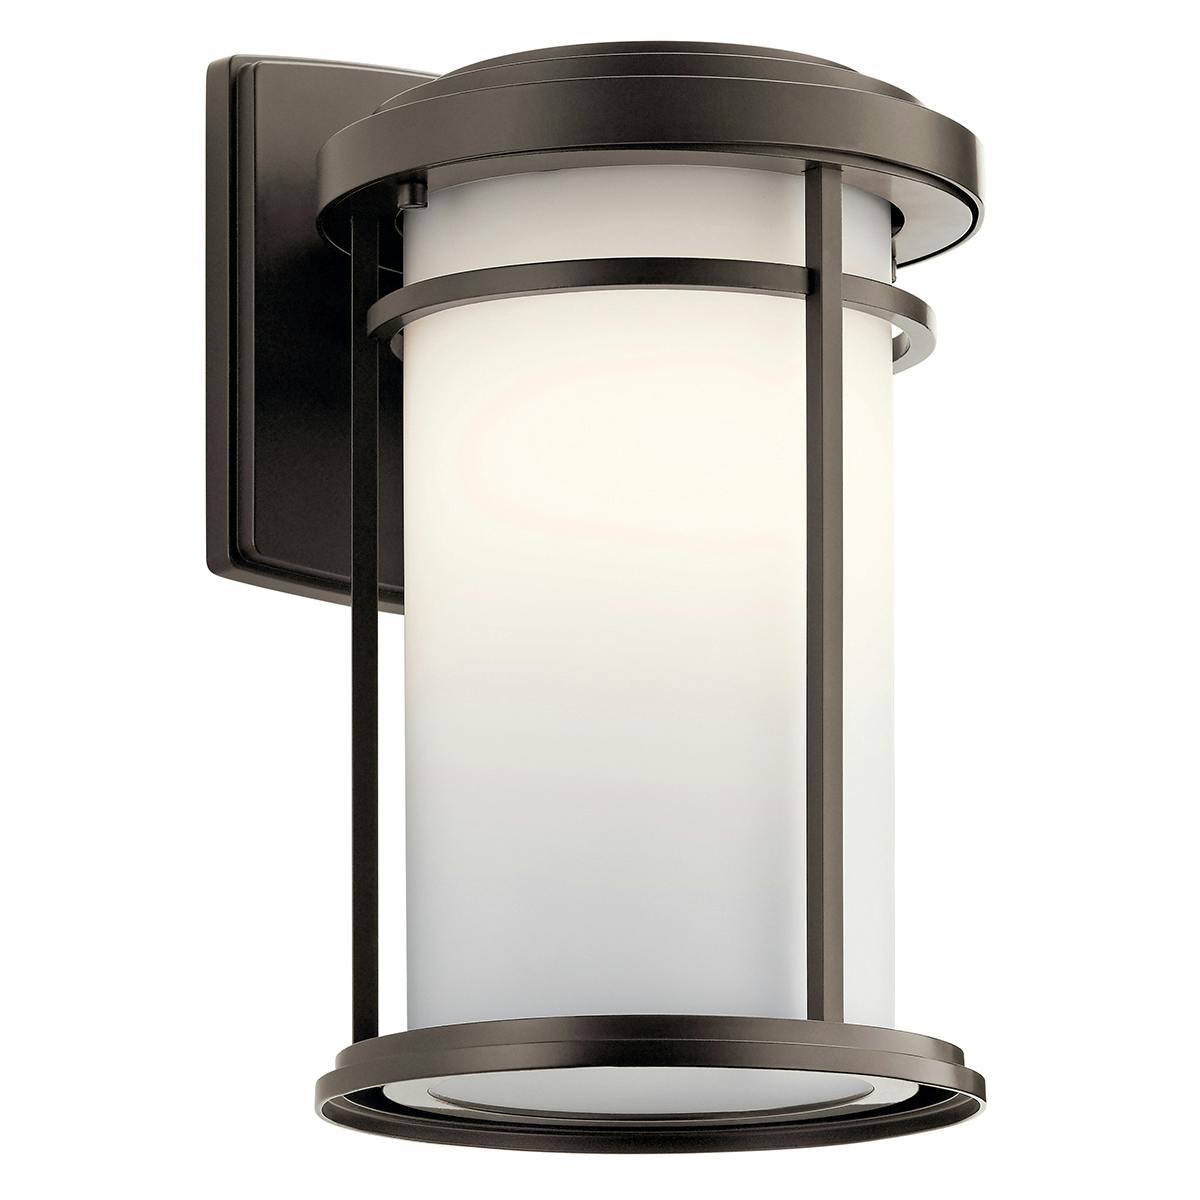 Toman 13.5" LED Outdoor Wall Light Black on a white background